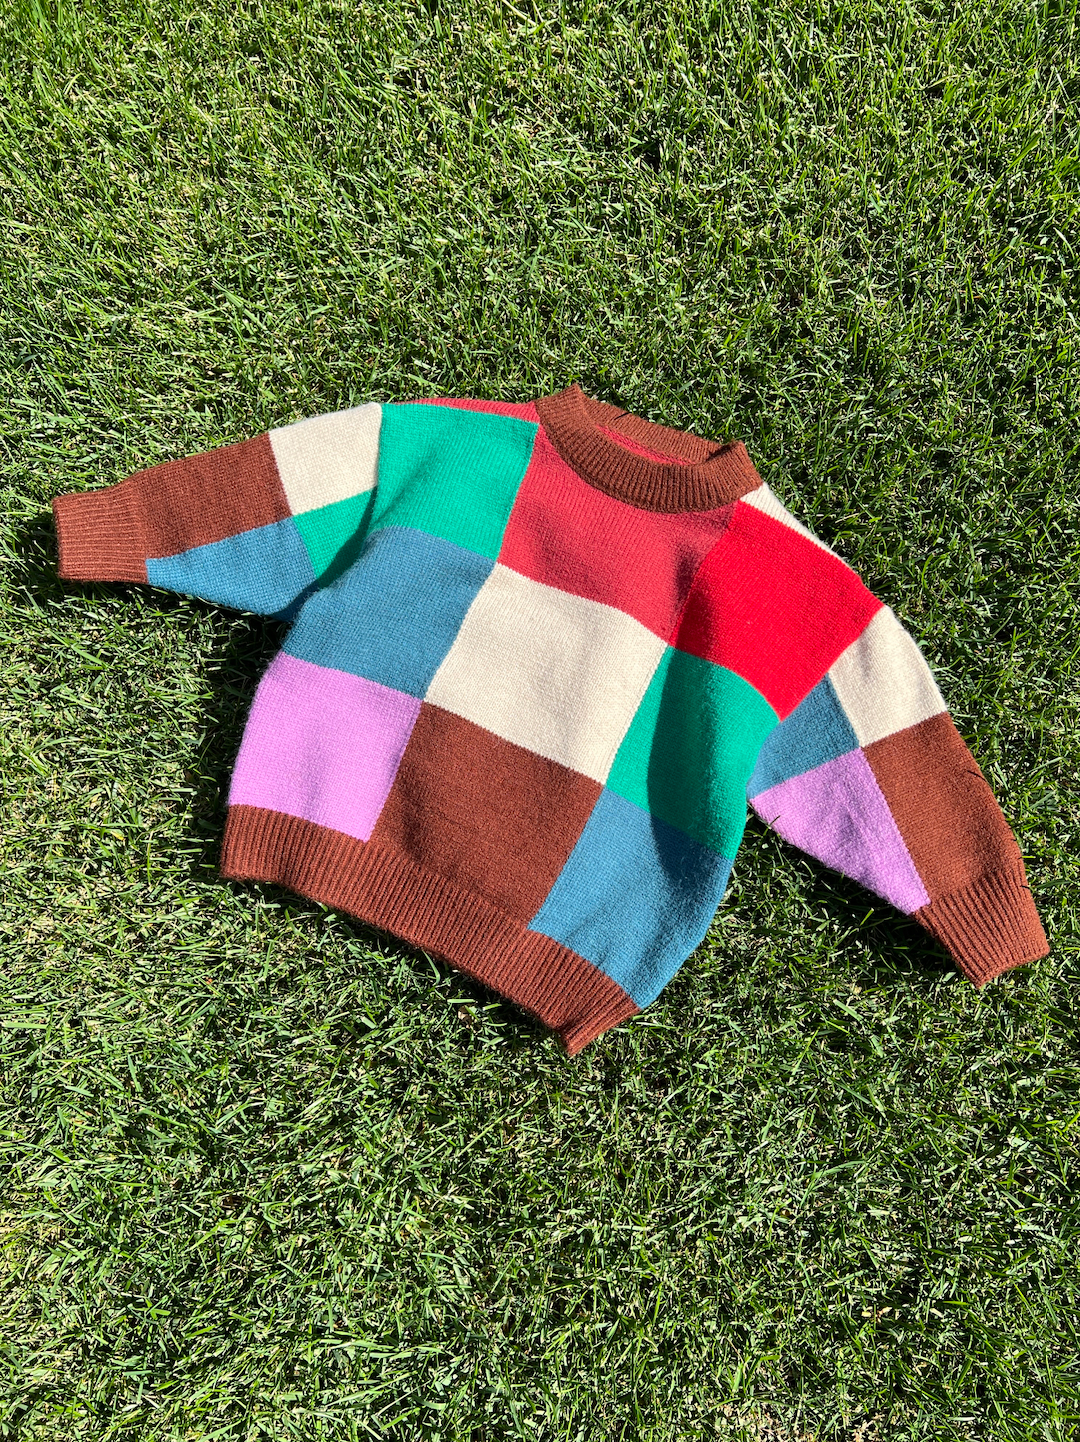 A kids' colorblock sweater laid on grass, in shades of red, pink, cream, brown, blue and green